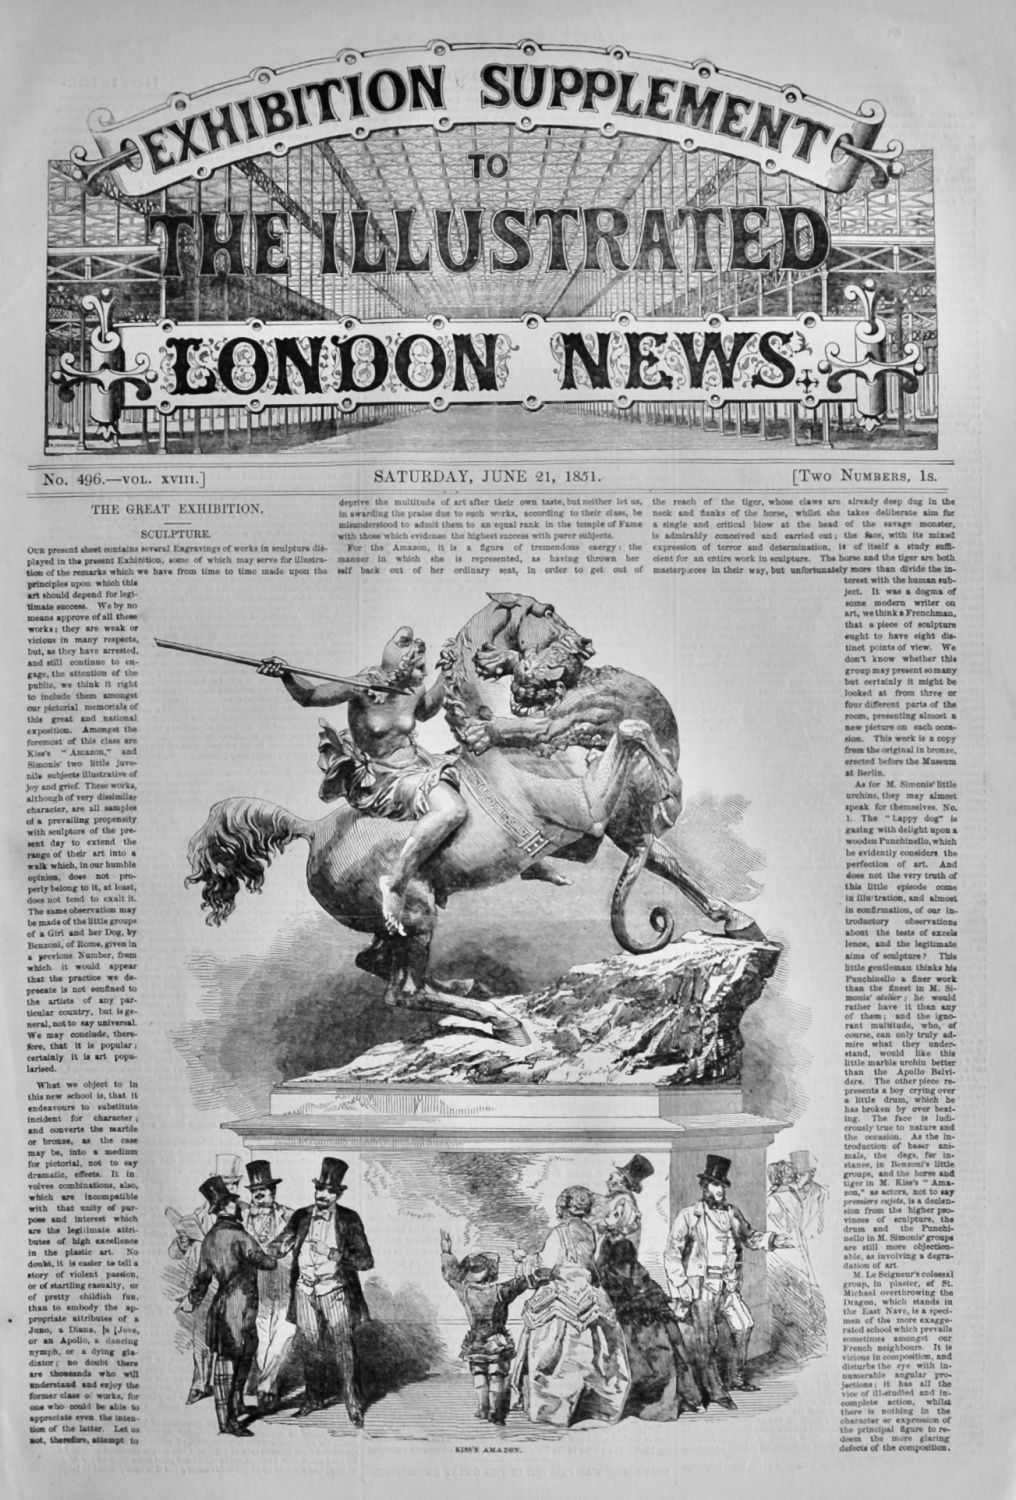 Great Exhibition Supplement to The Illustrated London News, June 21st, 1851